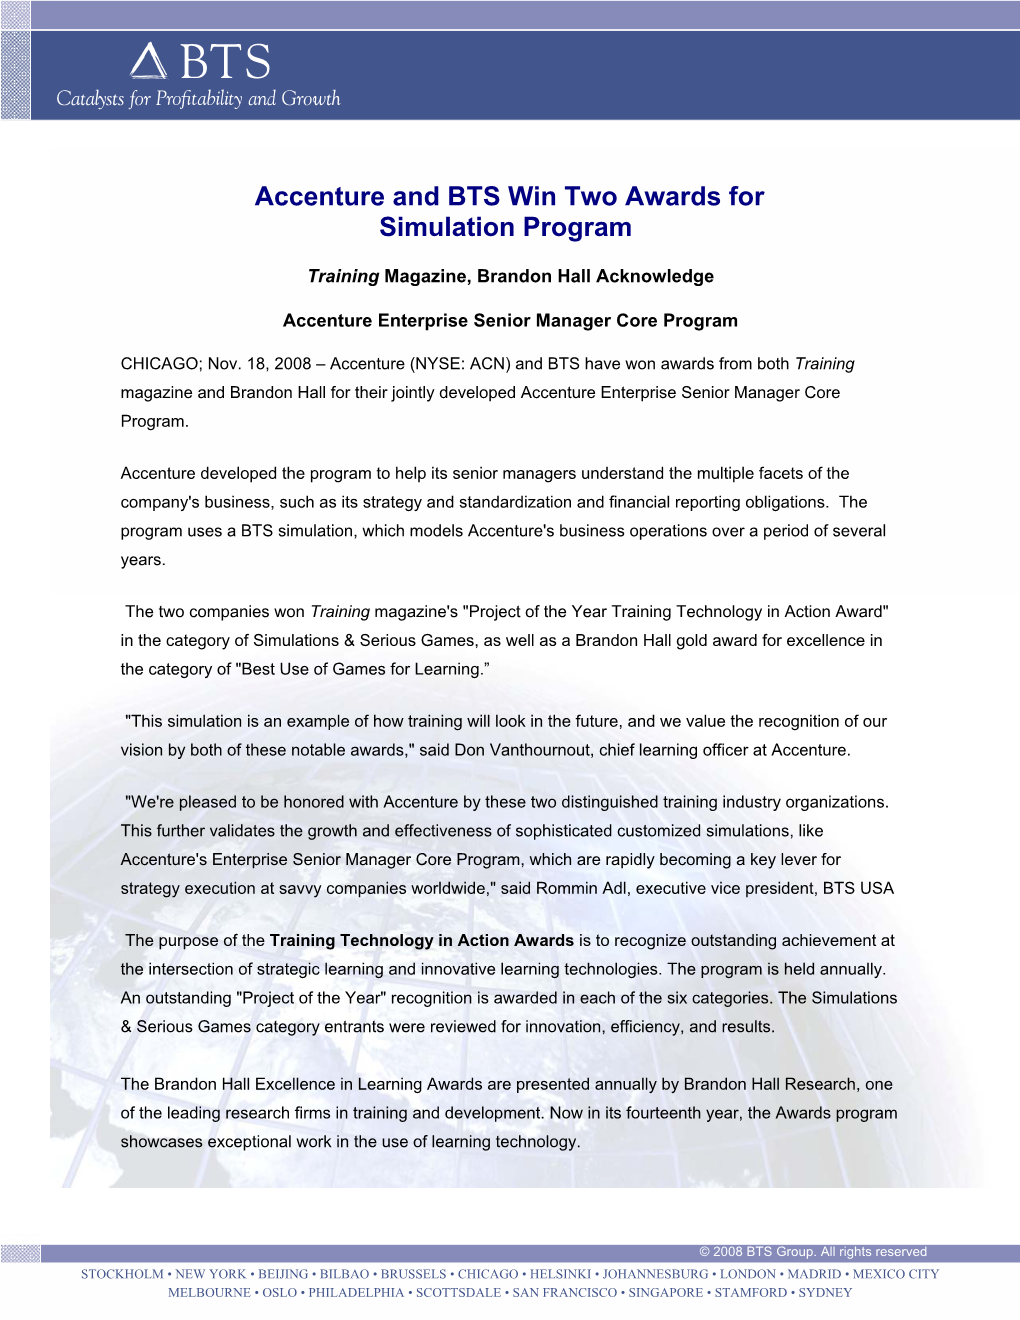 Accenture and BTS Win Two Awards for Simulation Program